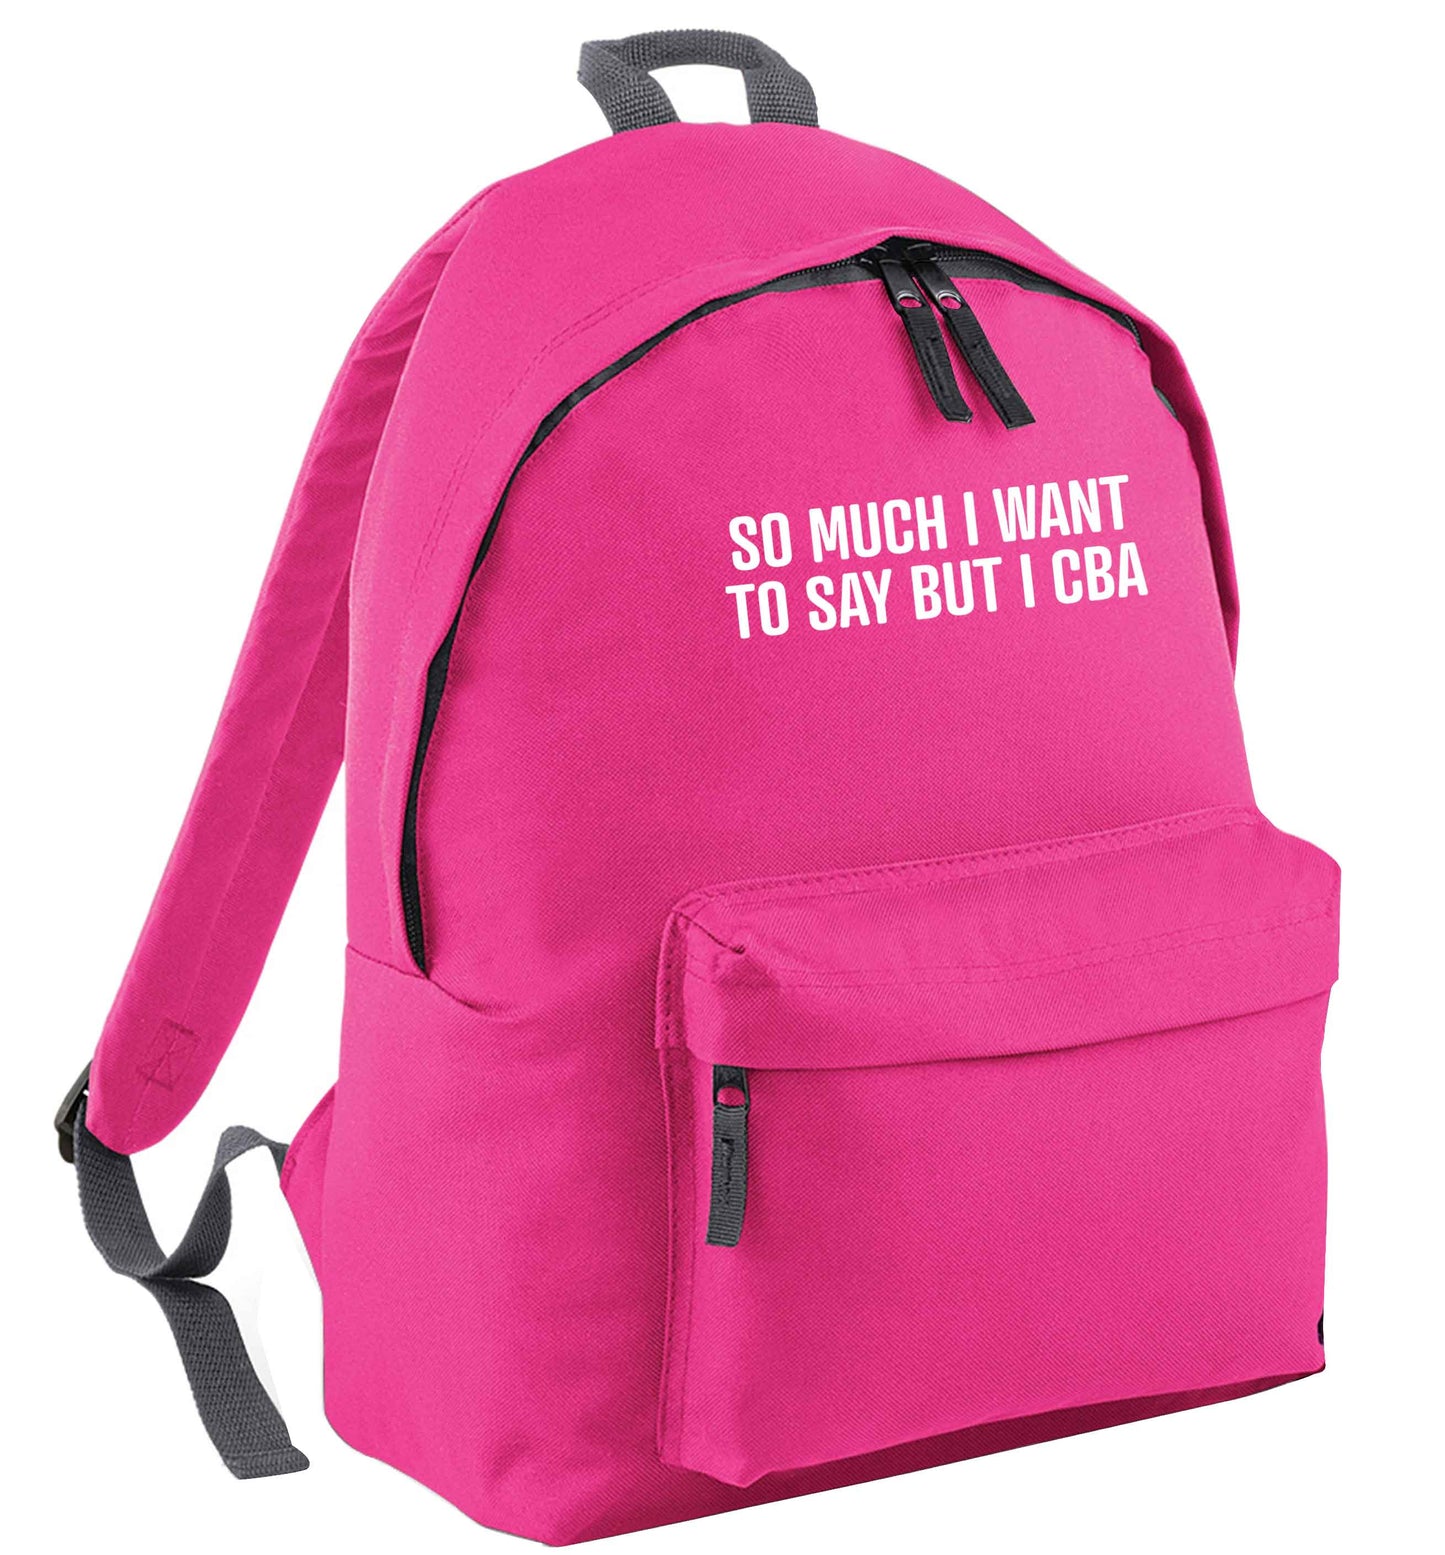 So much I want to say I cba  pink adults backpack